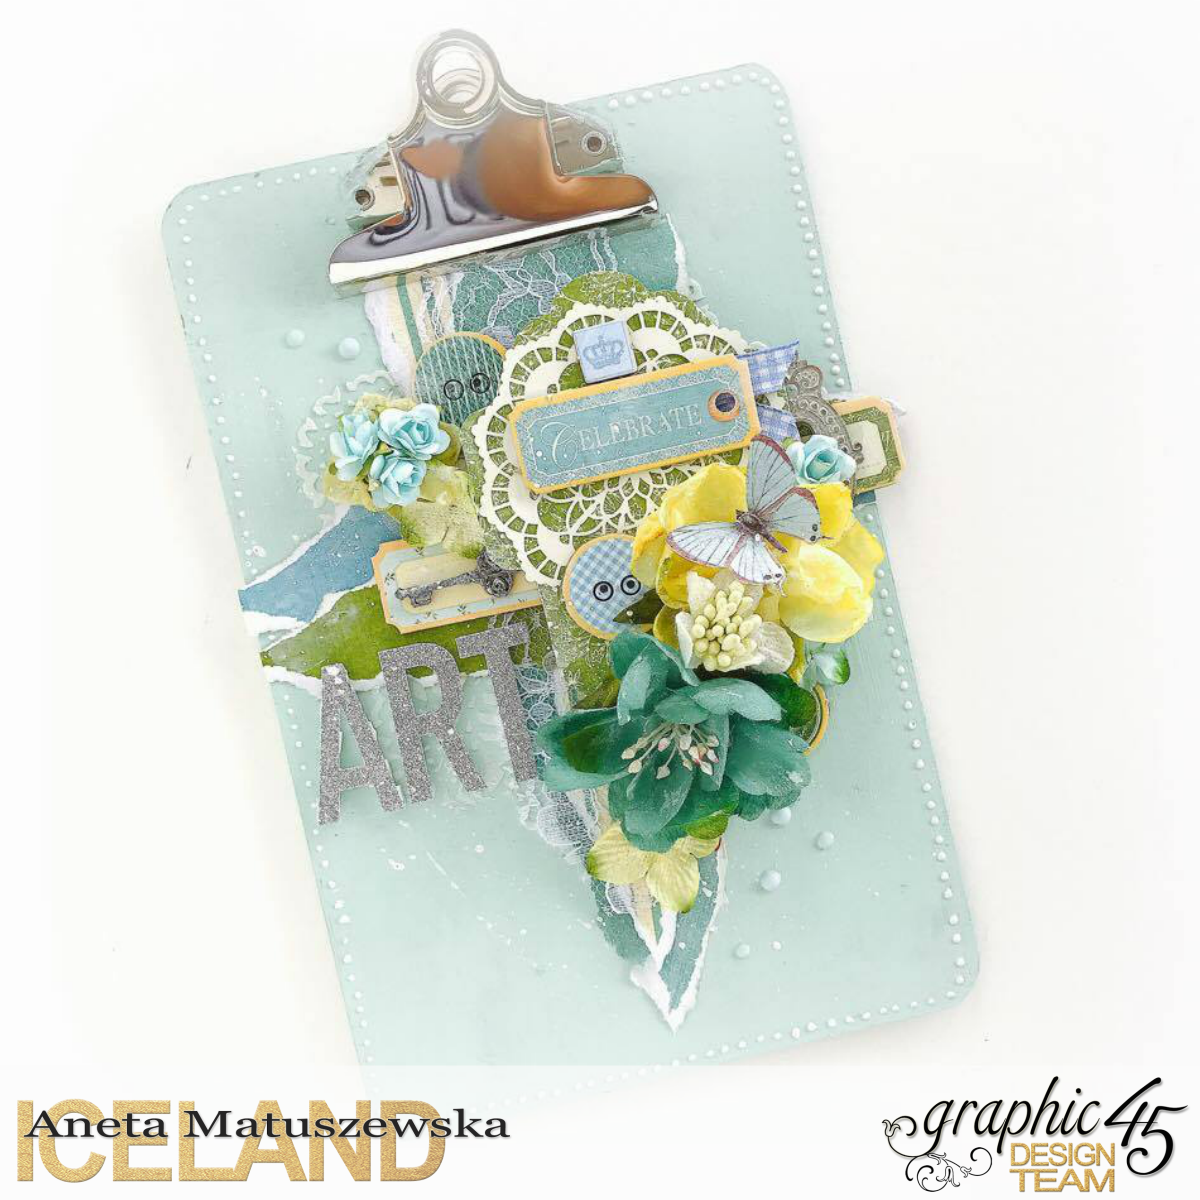 Once Upon a Springtime and Café Parisian altered note pad for G45, by Aneta Matuszewska photo 5.png